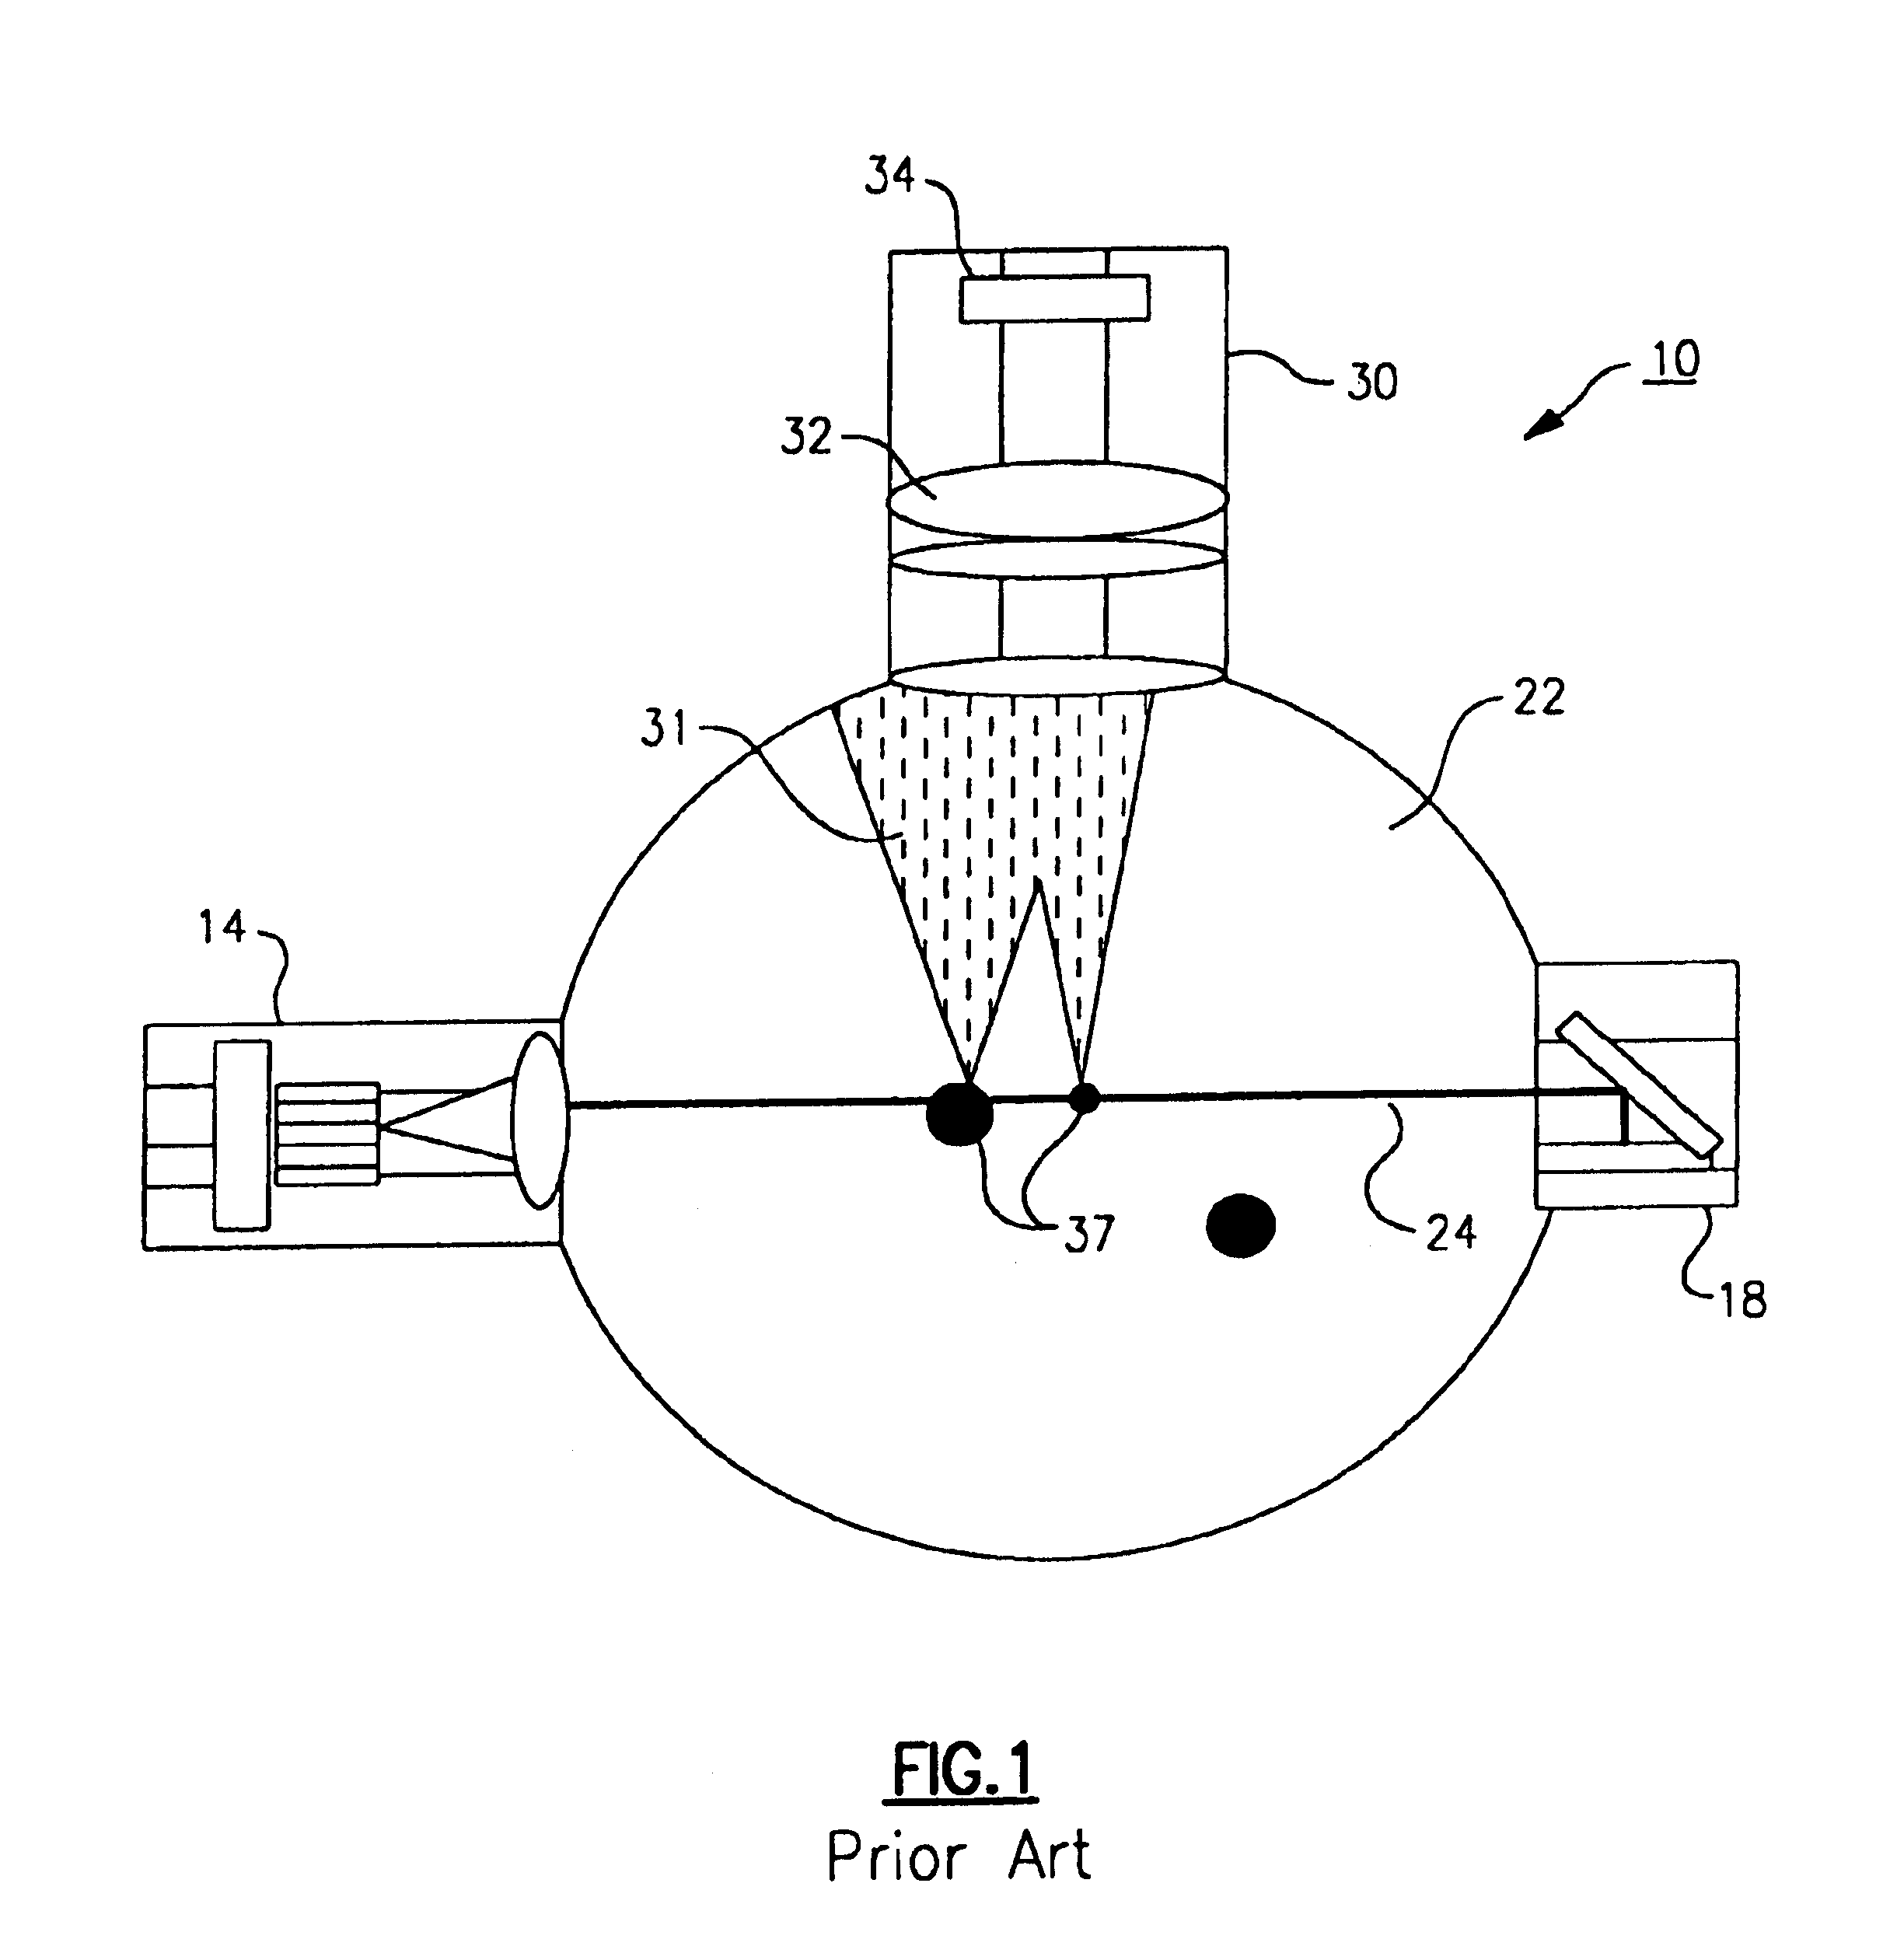 Signal processing method for in-situ, scanned-beam particle monitoring